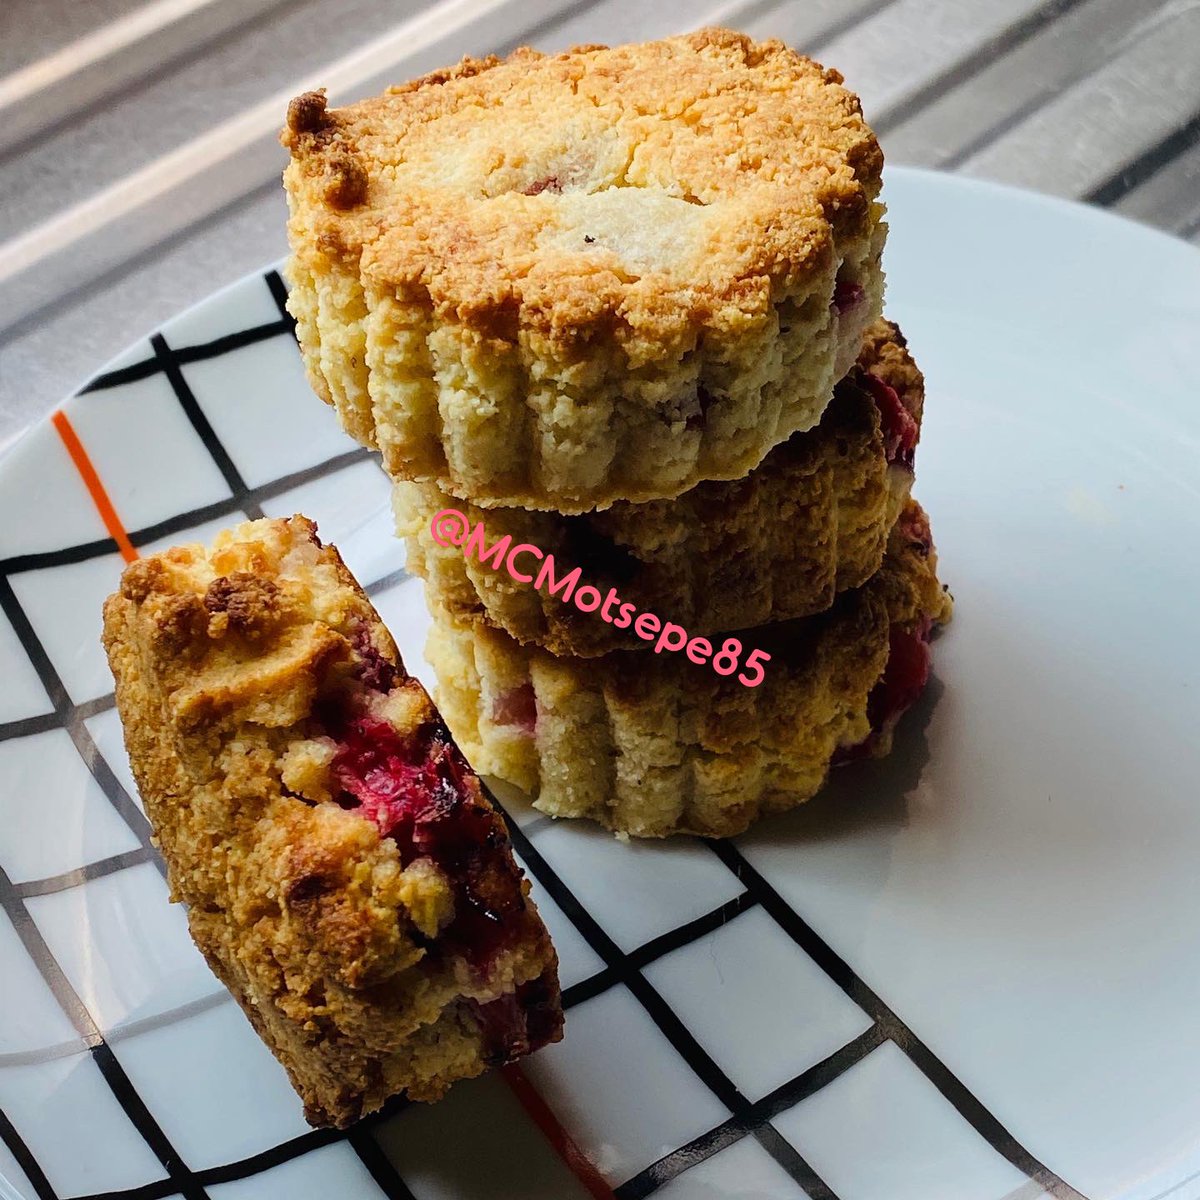 On #day60oflockdown and #AfricaDay2020 I made Low Carb Strawberry 🍓 Scones 
Recipe Below and on my insta for step-by-step 
IG: @MCMotsepe85